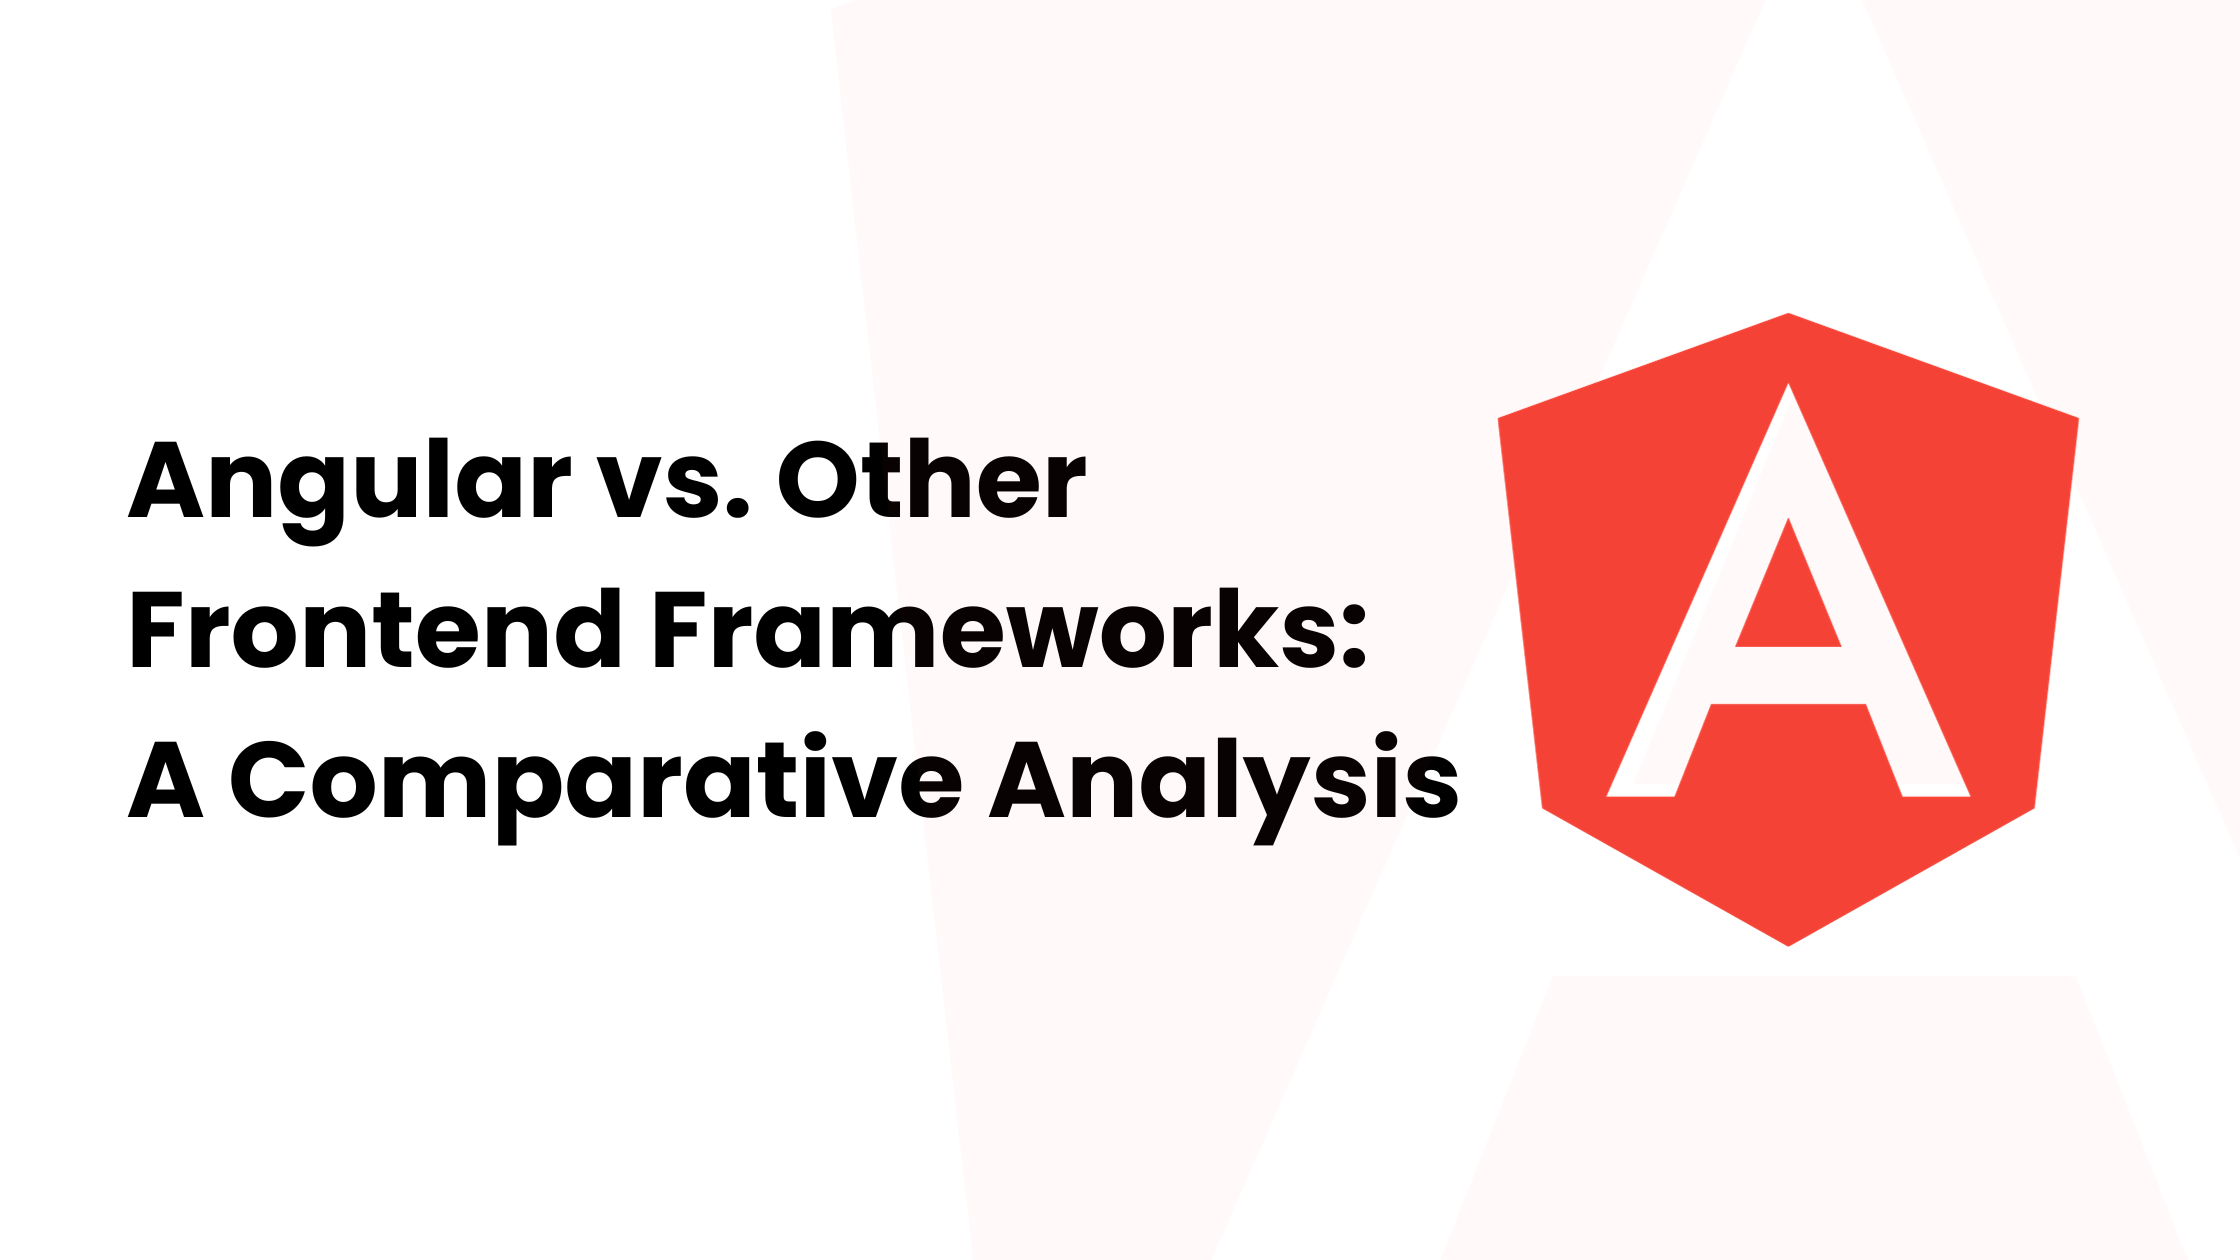 Angular vs. Other Frontend Frameworks: A Comparative Analysis